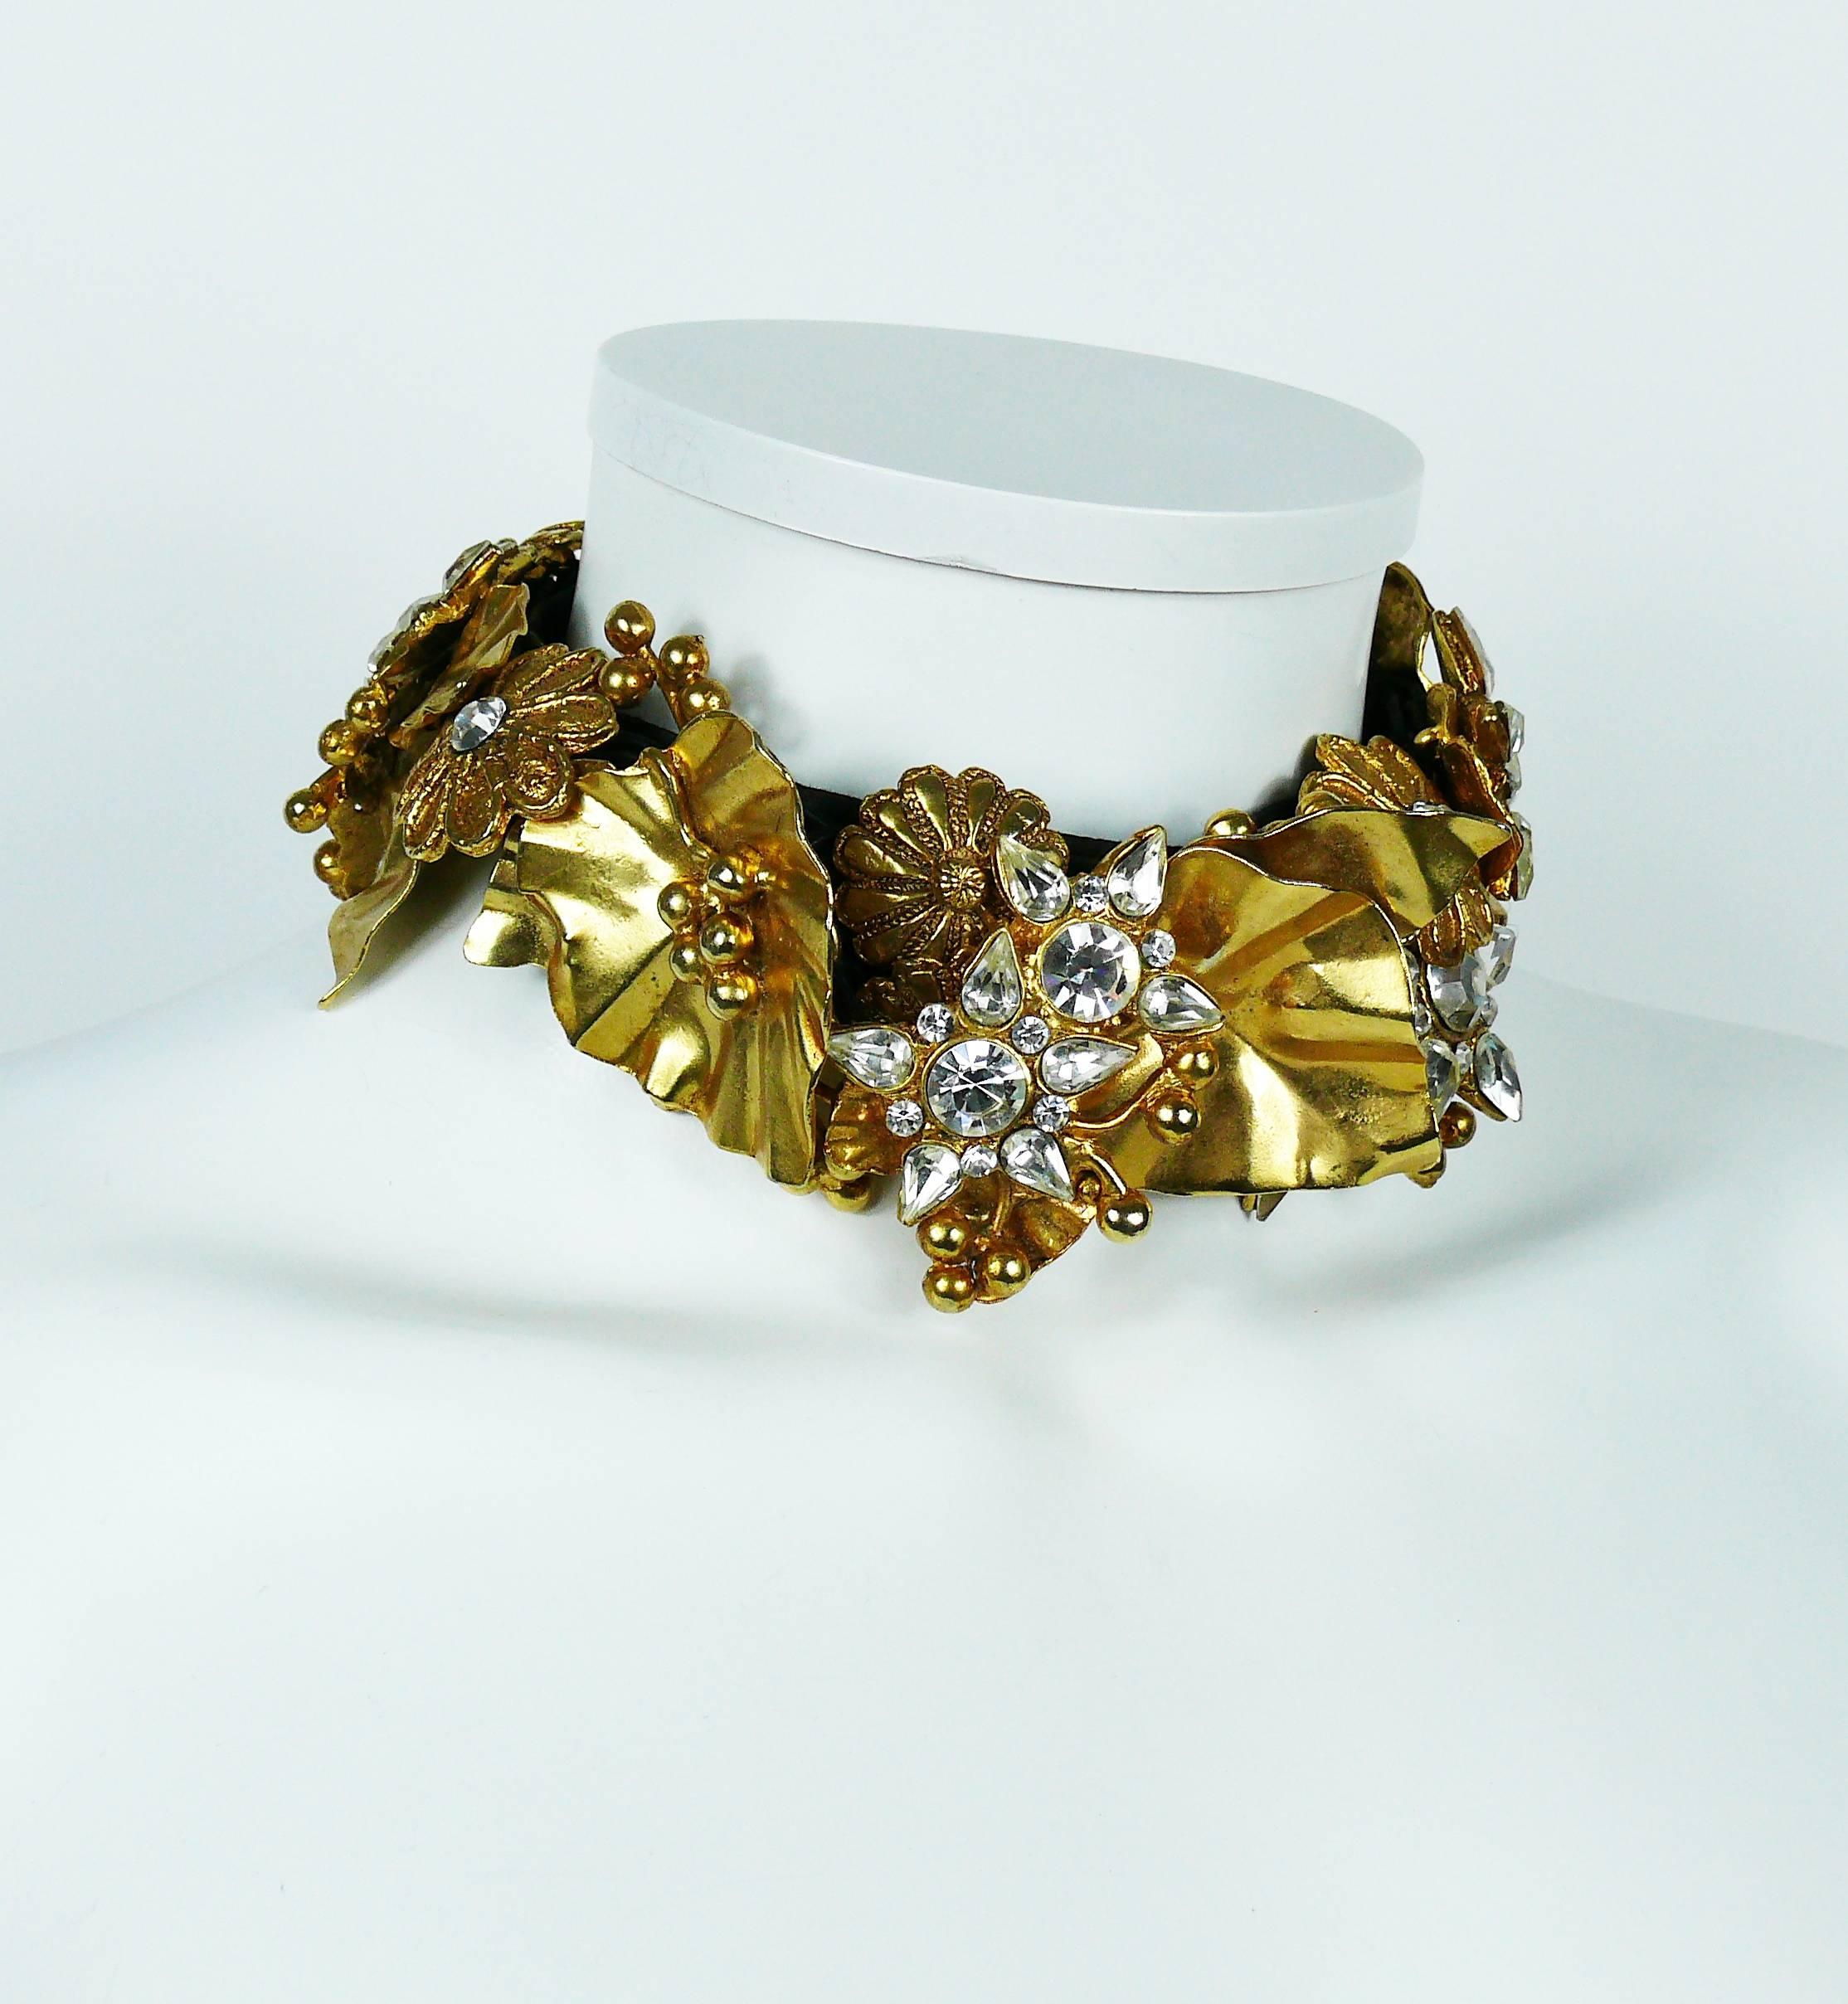 CHRISTIAN LACROIX vintage choker featuring gold toned floral elements embellished with clear crystals.

Each element is sewn on a black passementerie strap.
Elements are dangling to ensure flexibility around neck.

Hook clasp.
Extension